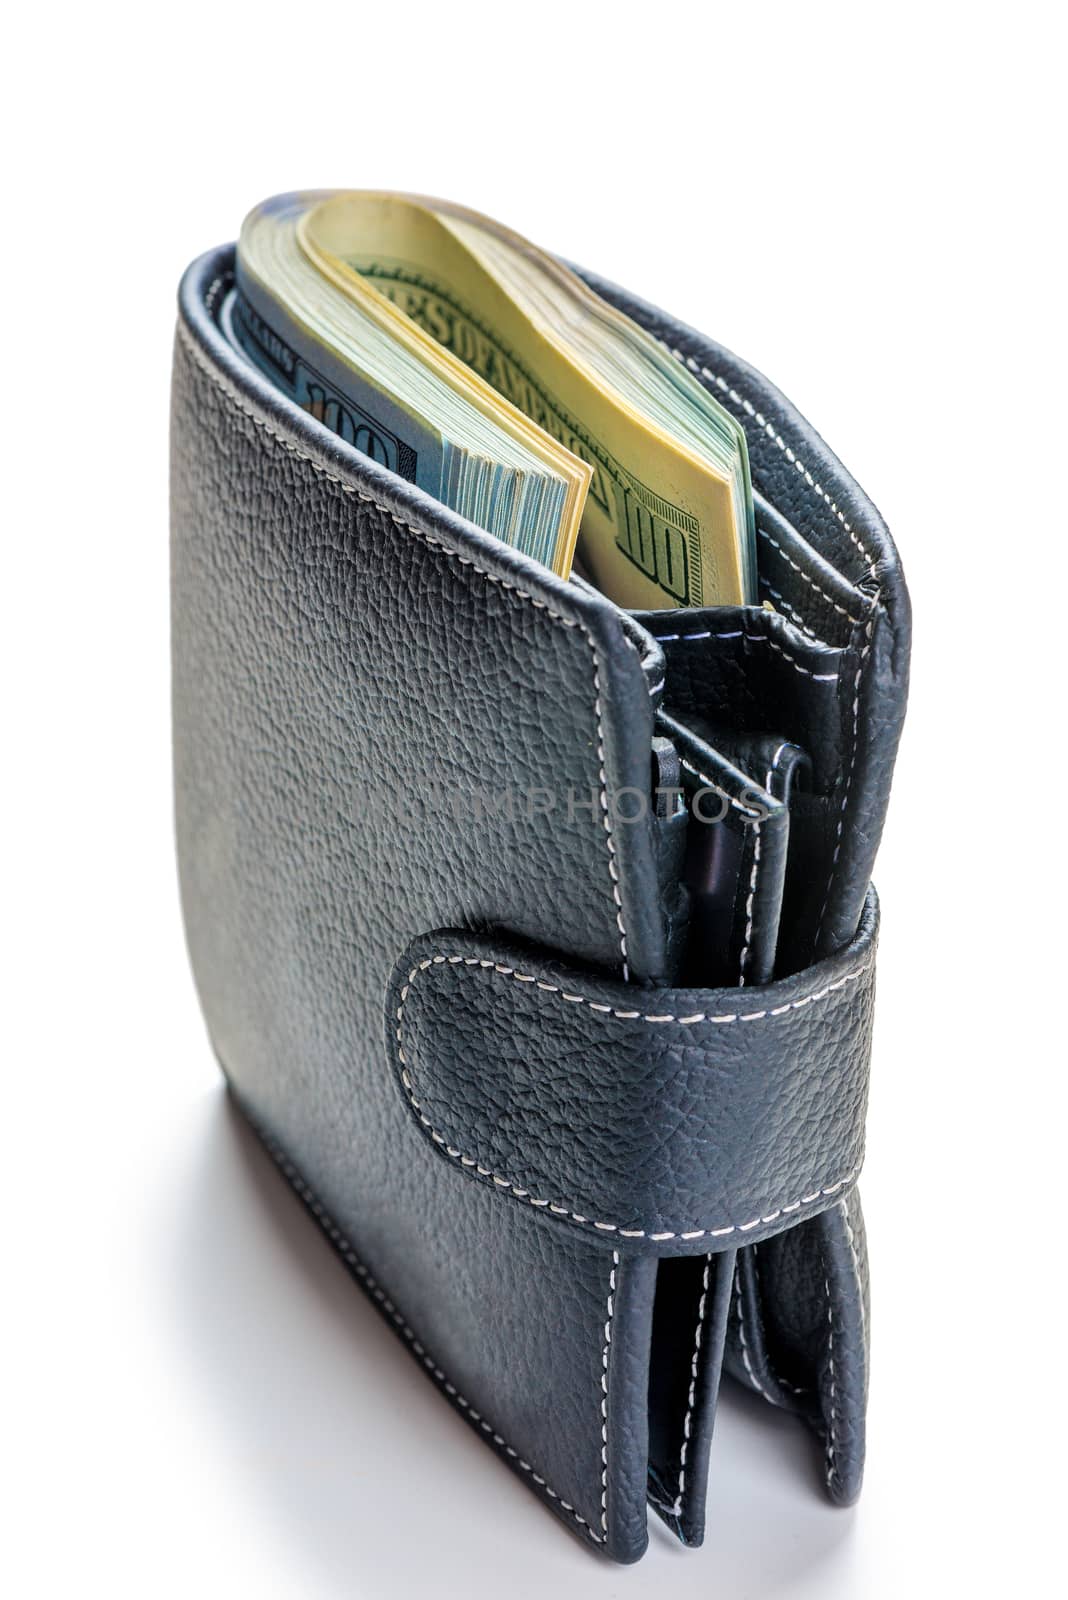 close-up of a wallet full of 100 dollar bills on a white background